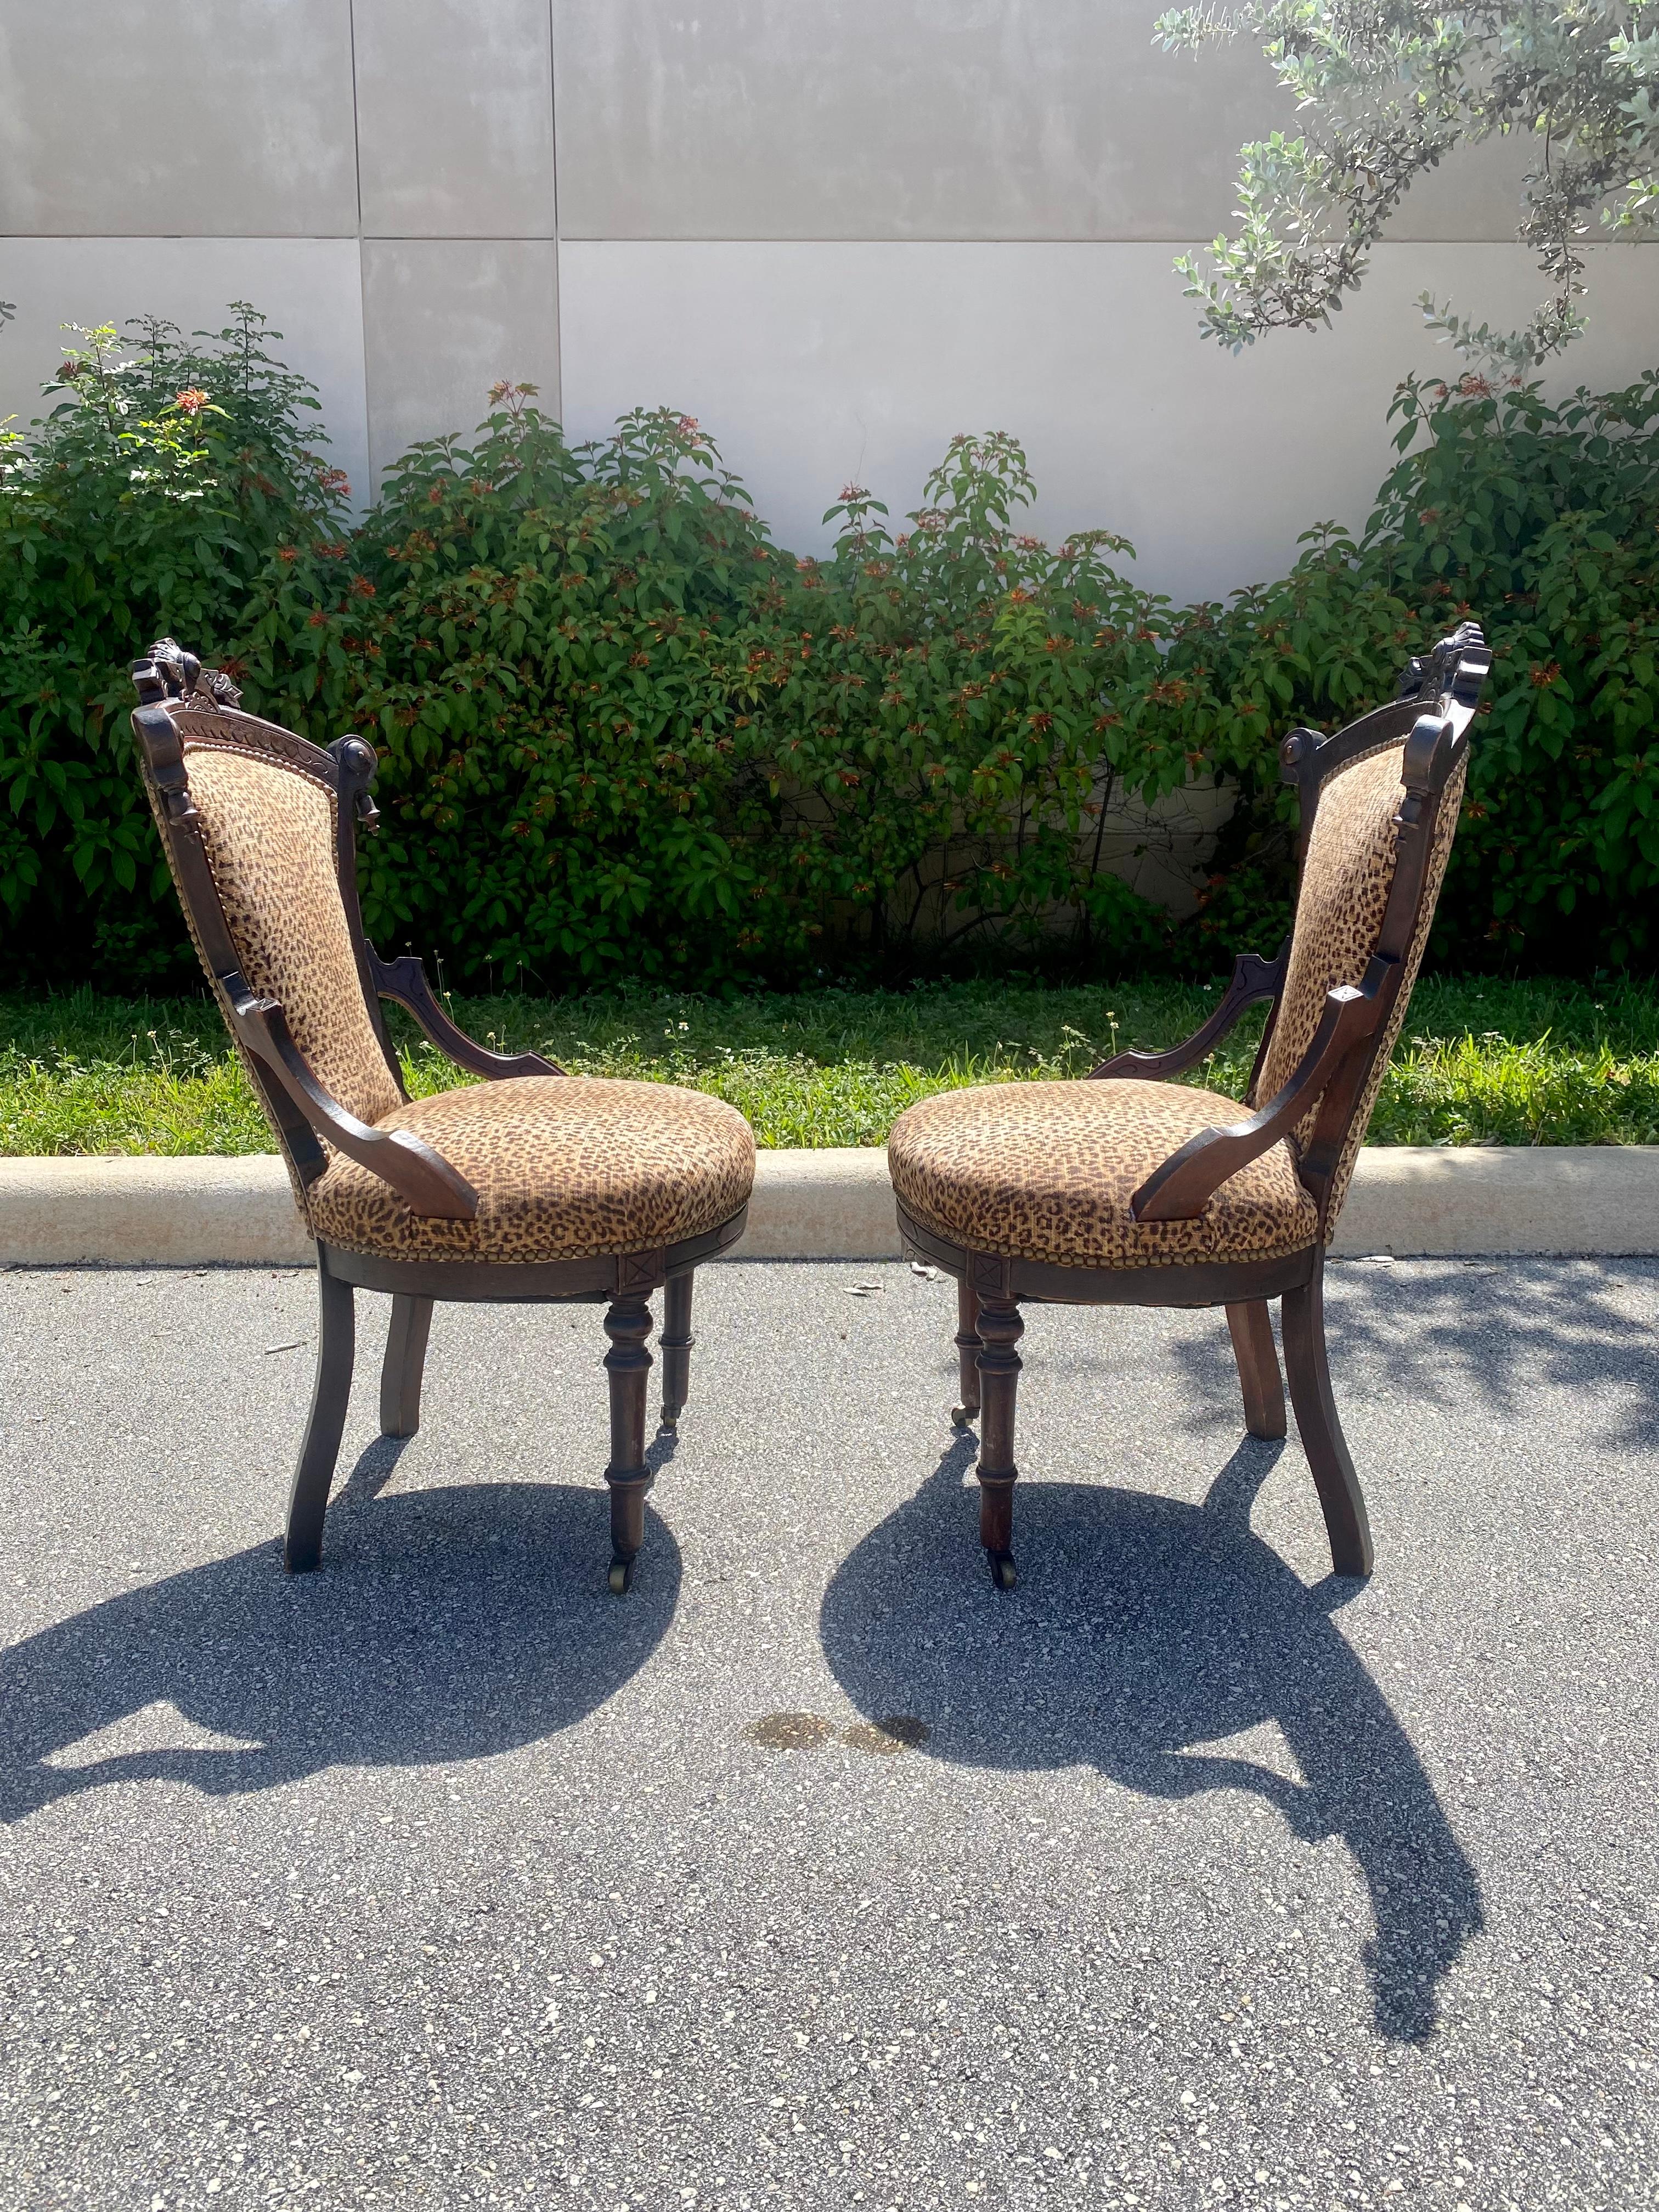 On offer on this occasion is one of the most stunning chairs on brass castors you could hope to find. This is an ultra-rare opportunity to acquire what is, unequivocally, the best of the best, it being a most spectacular and beautifully-presented